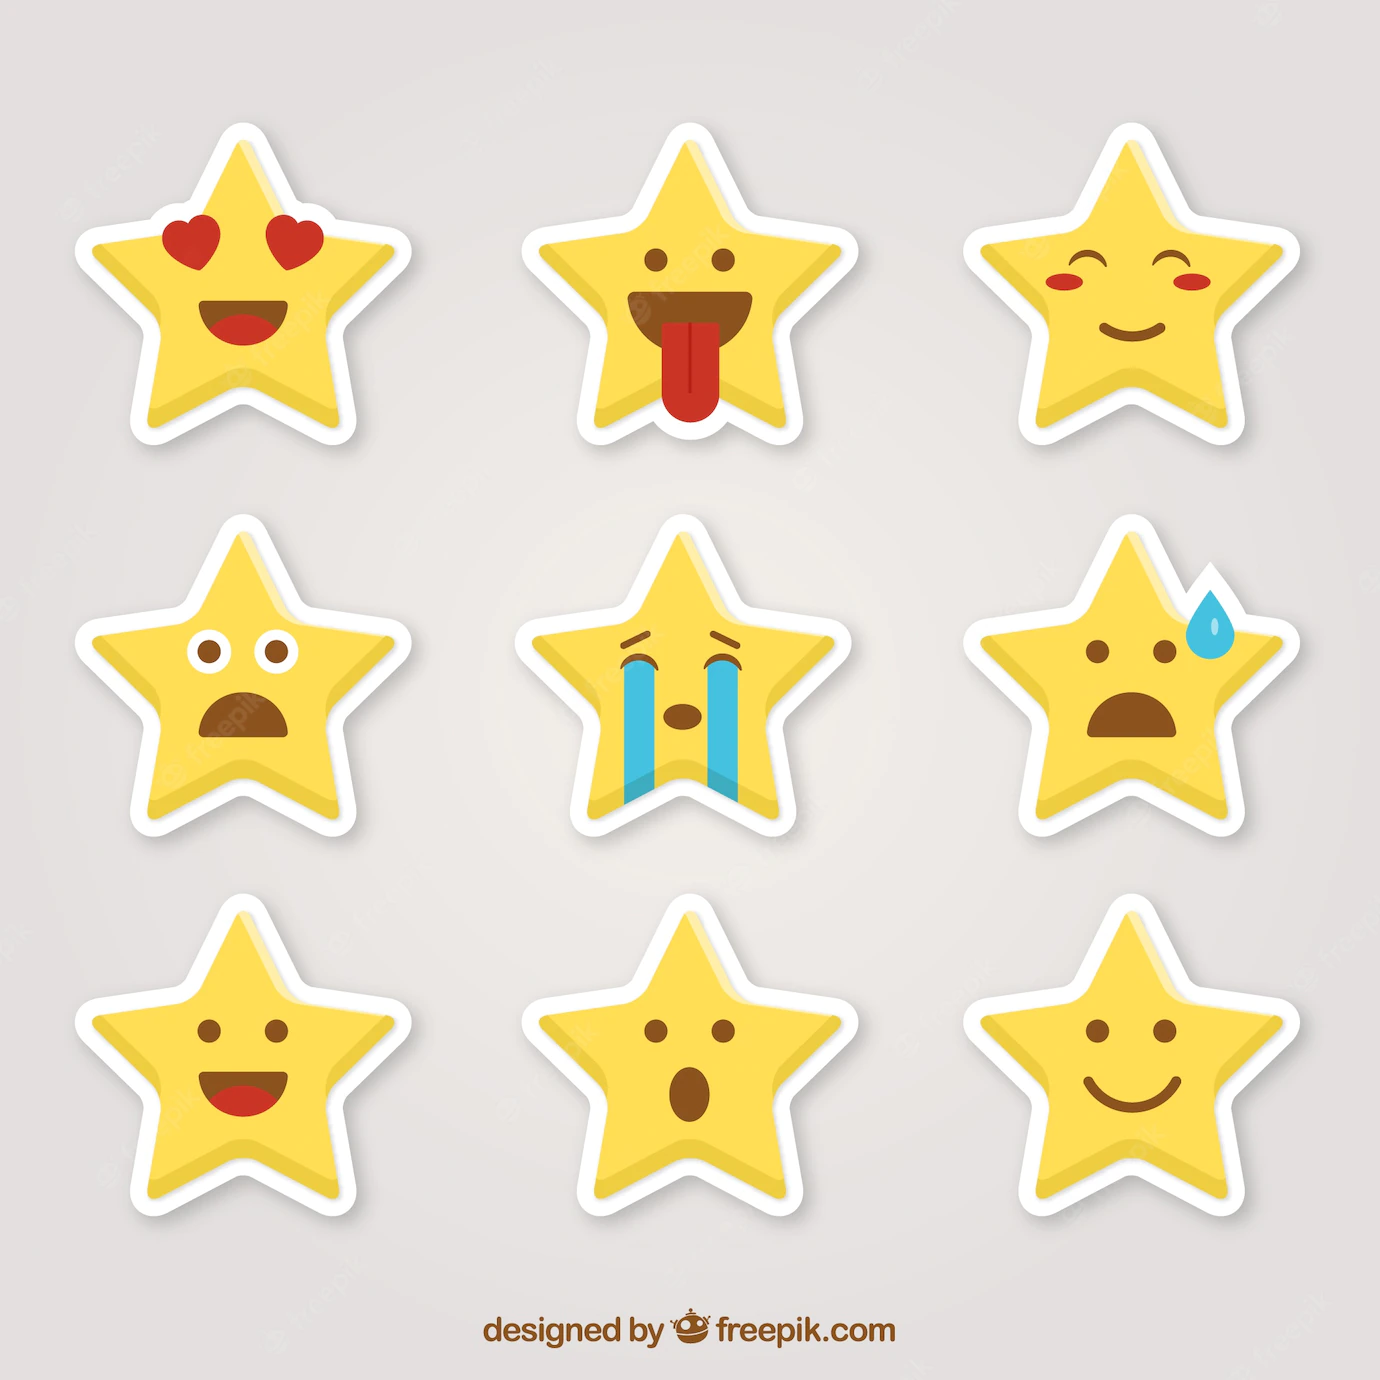 Funny Stickers With Star Shaped 23 2147590004